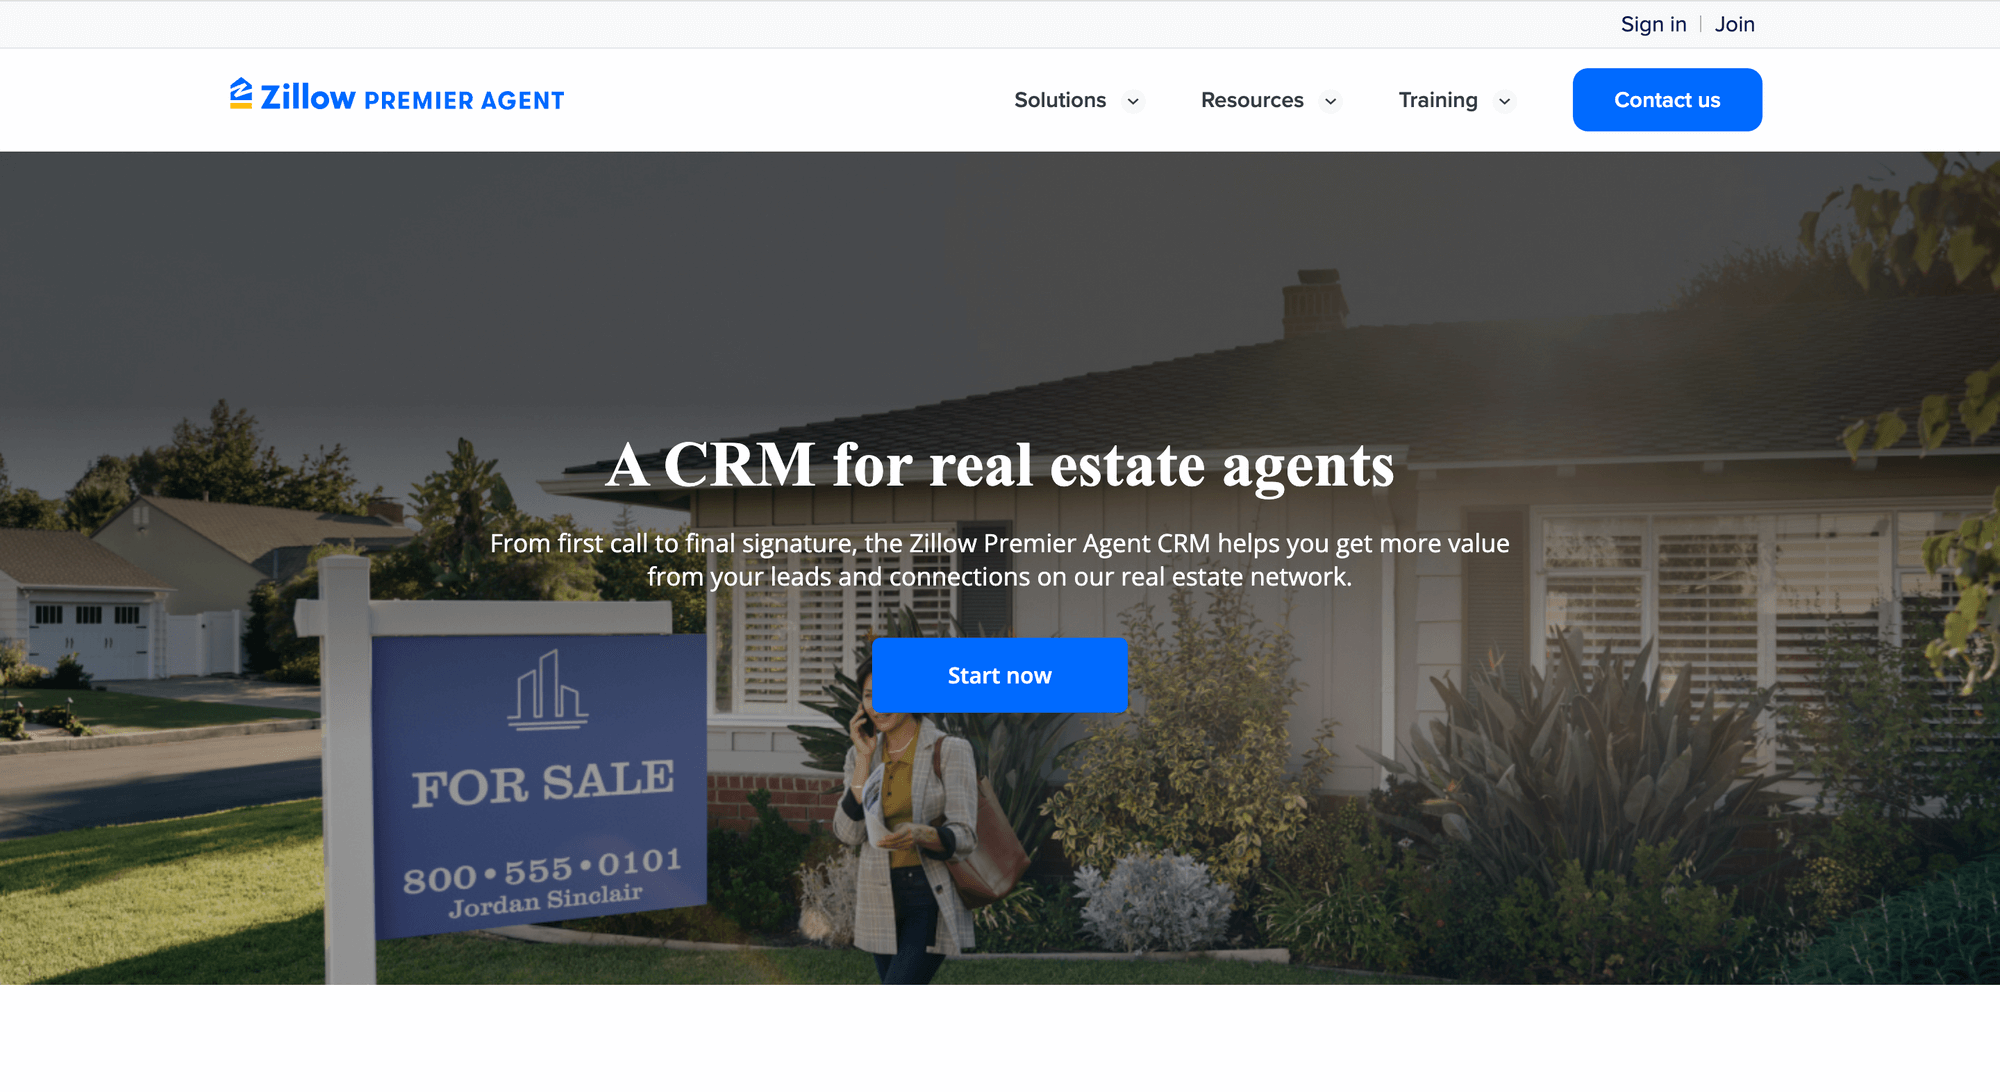 Zillow Premier Agent: A real estate CRM